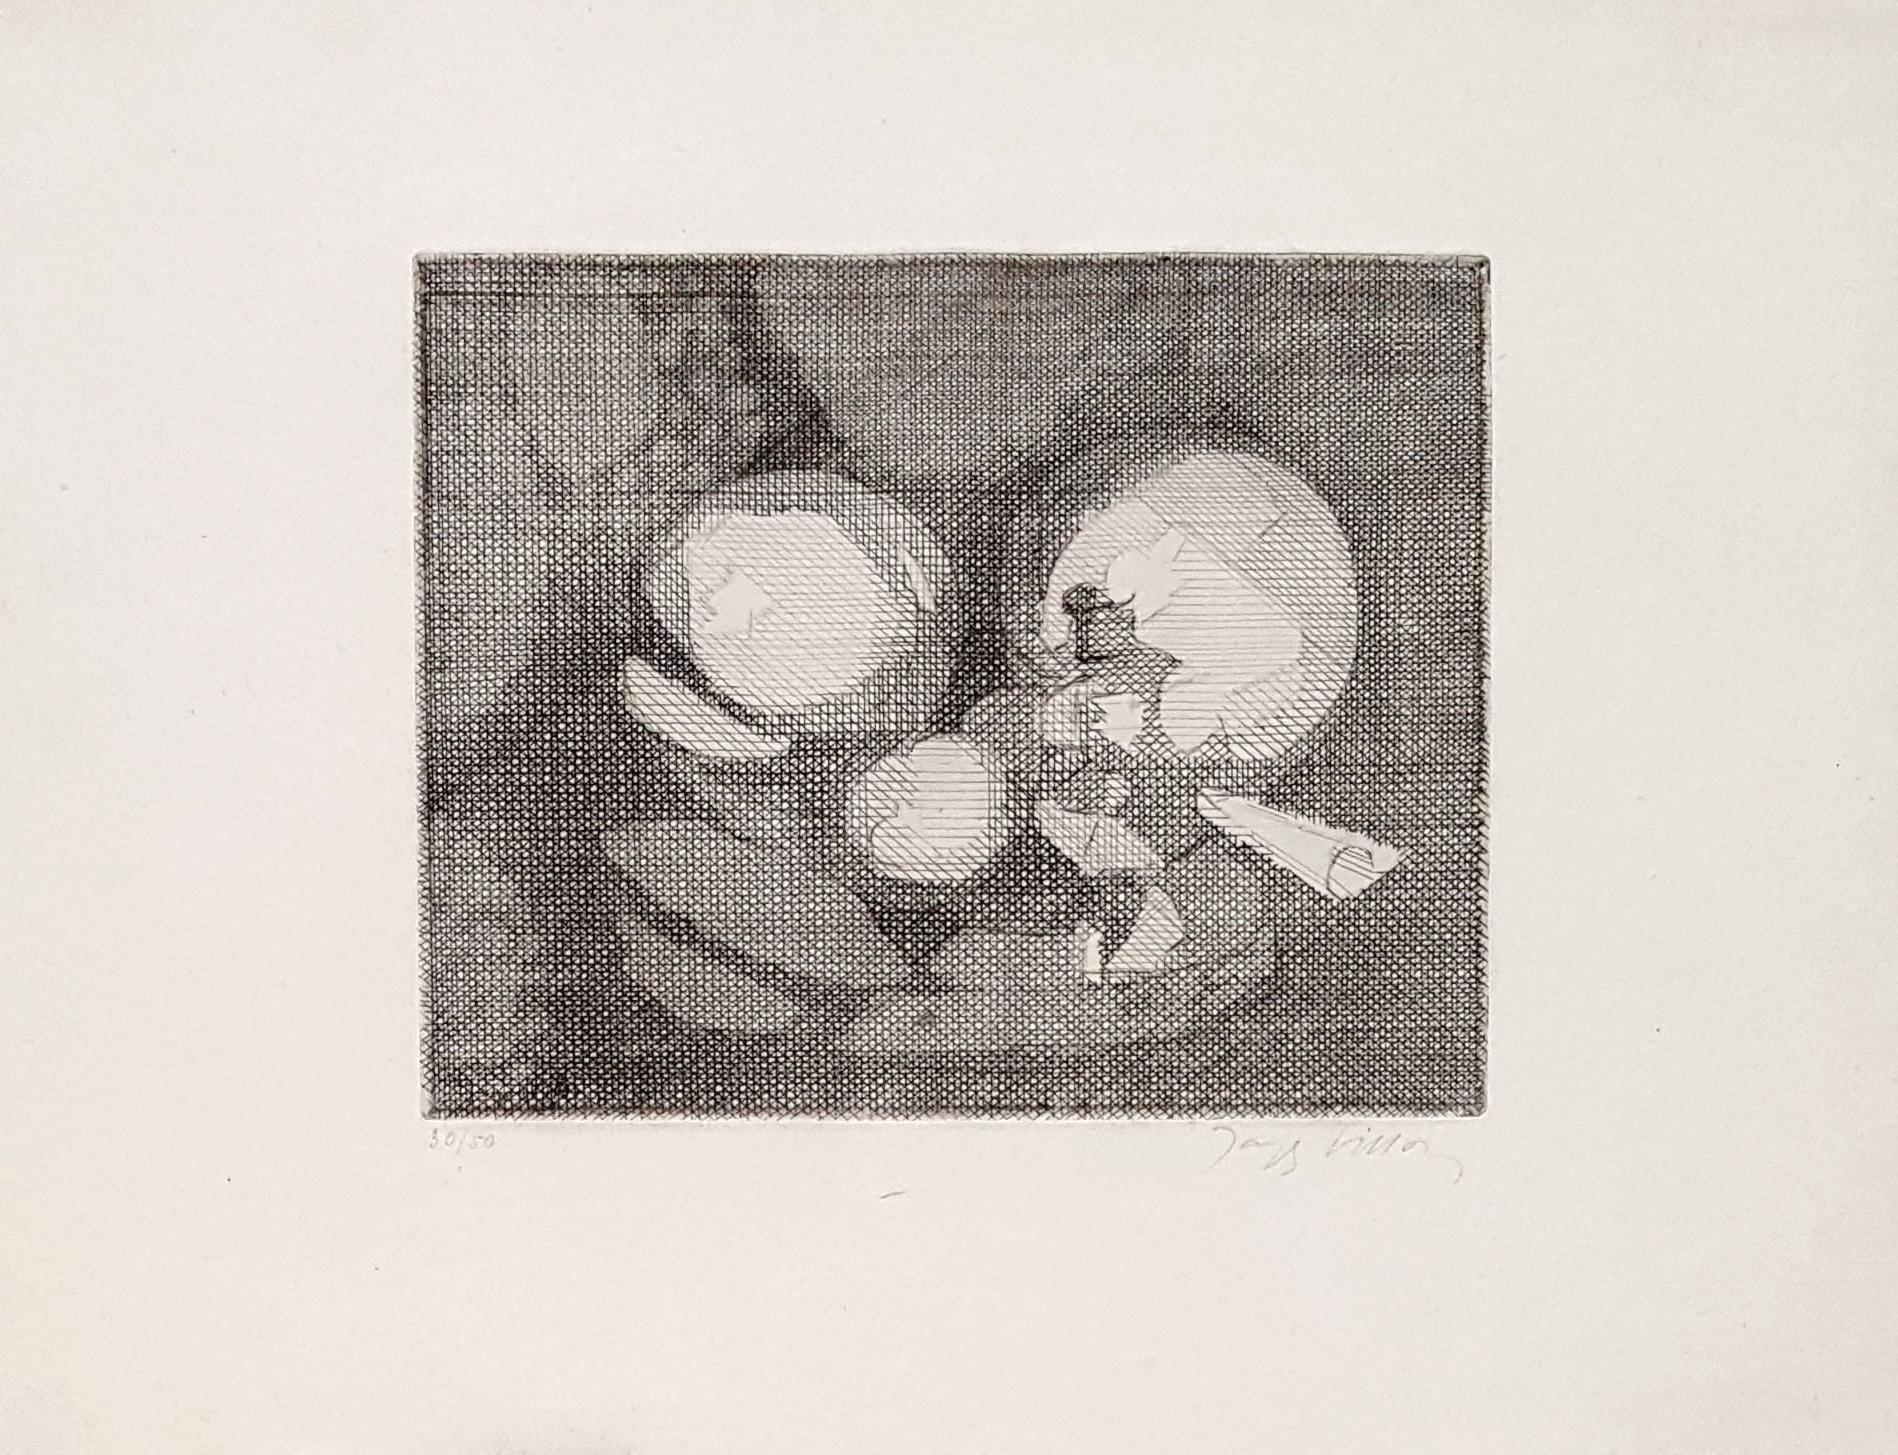 Jacques Villon Abstract Print - Composition - Original Etching Handsigned Numbered - 50 copies